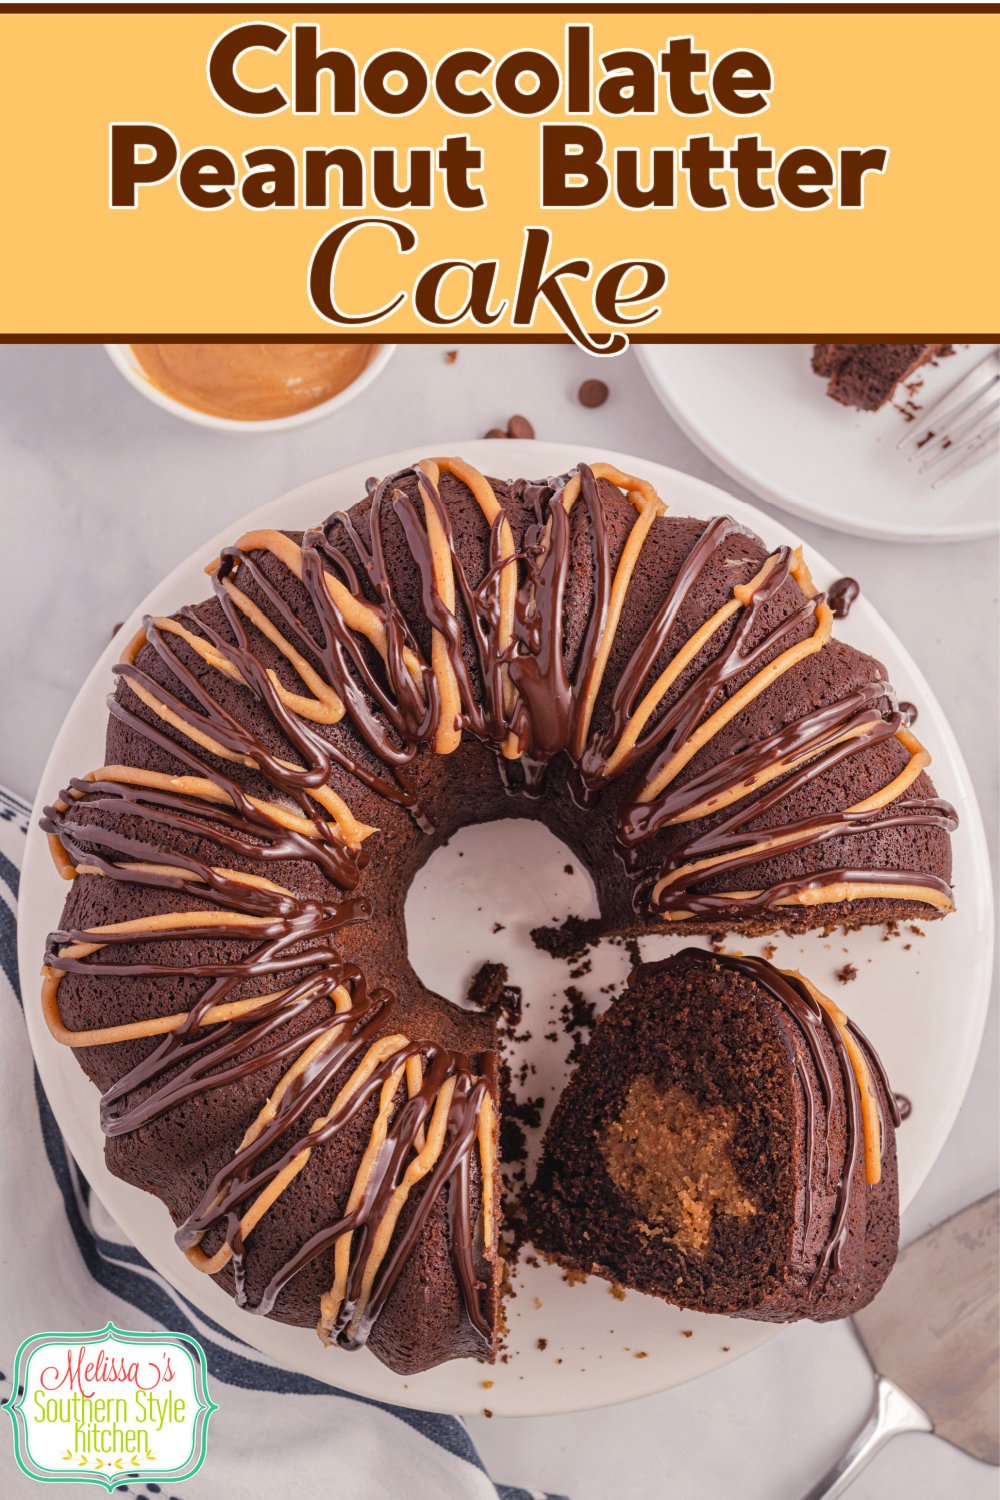 This Chocolate Peanut Butter Cake is drizzled with both a warm peanut butter and chocolate glaze. #peanutbuttercake #chocolatecake #bundtcake #bundtcakerecipes #chocolatepenutbuttercake #cakes #cakerecipes #peanutbutterrecipes via @melissasssk